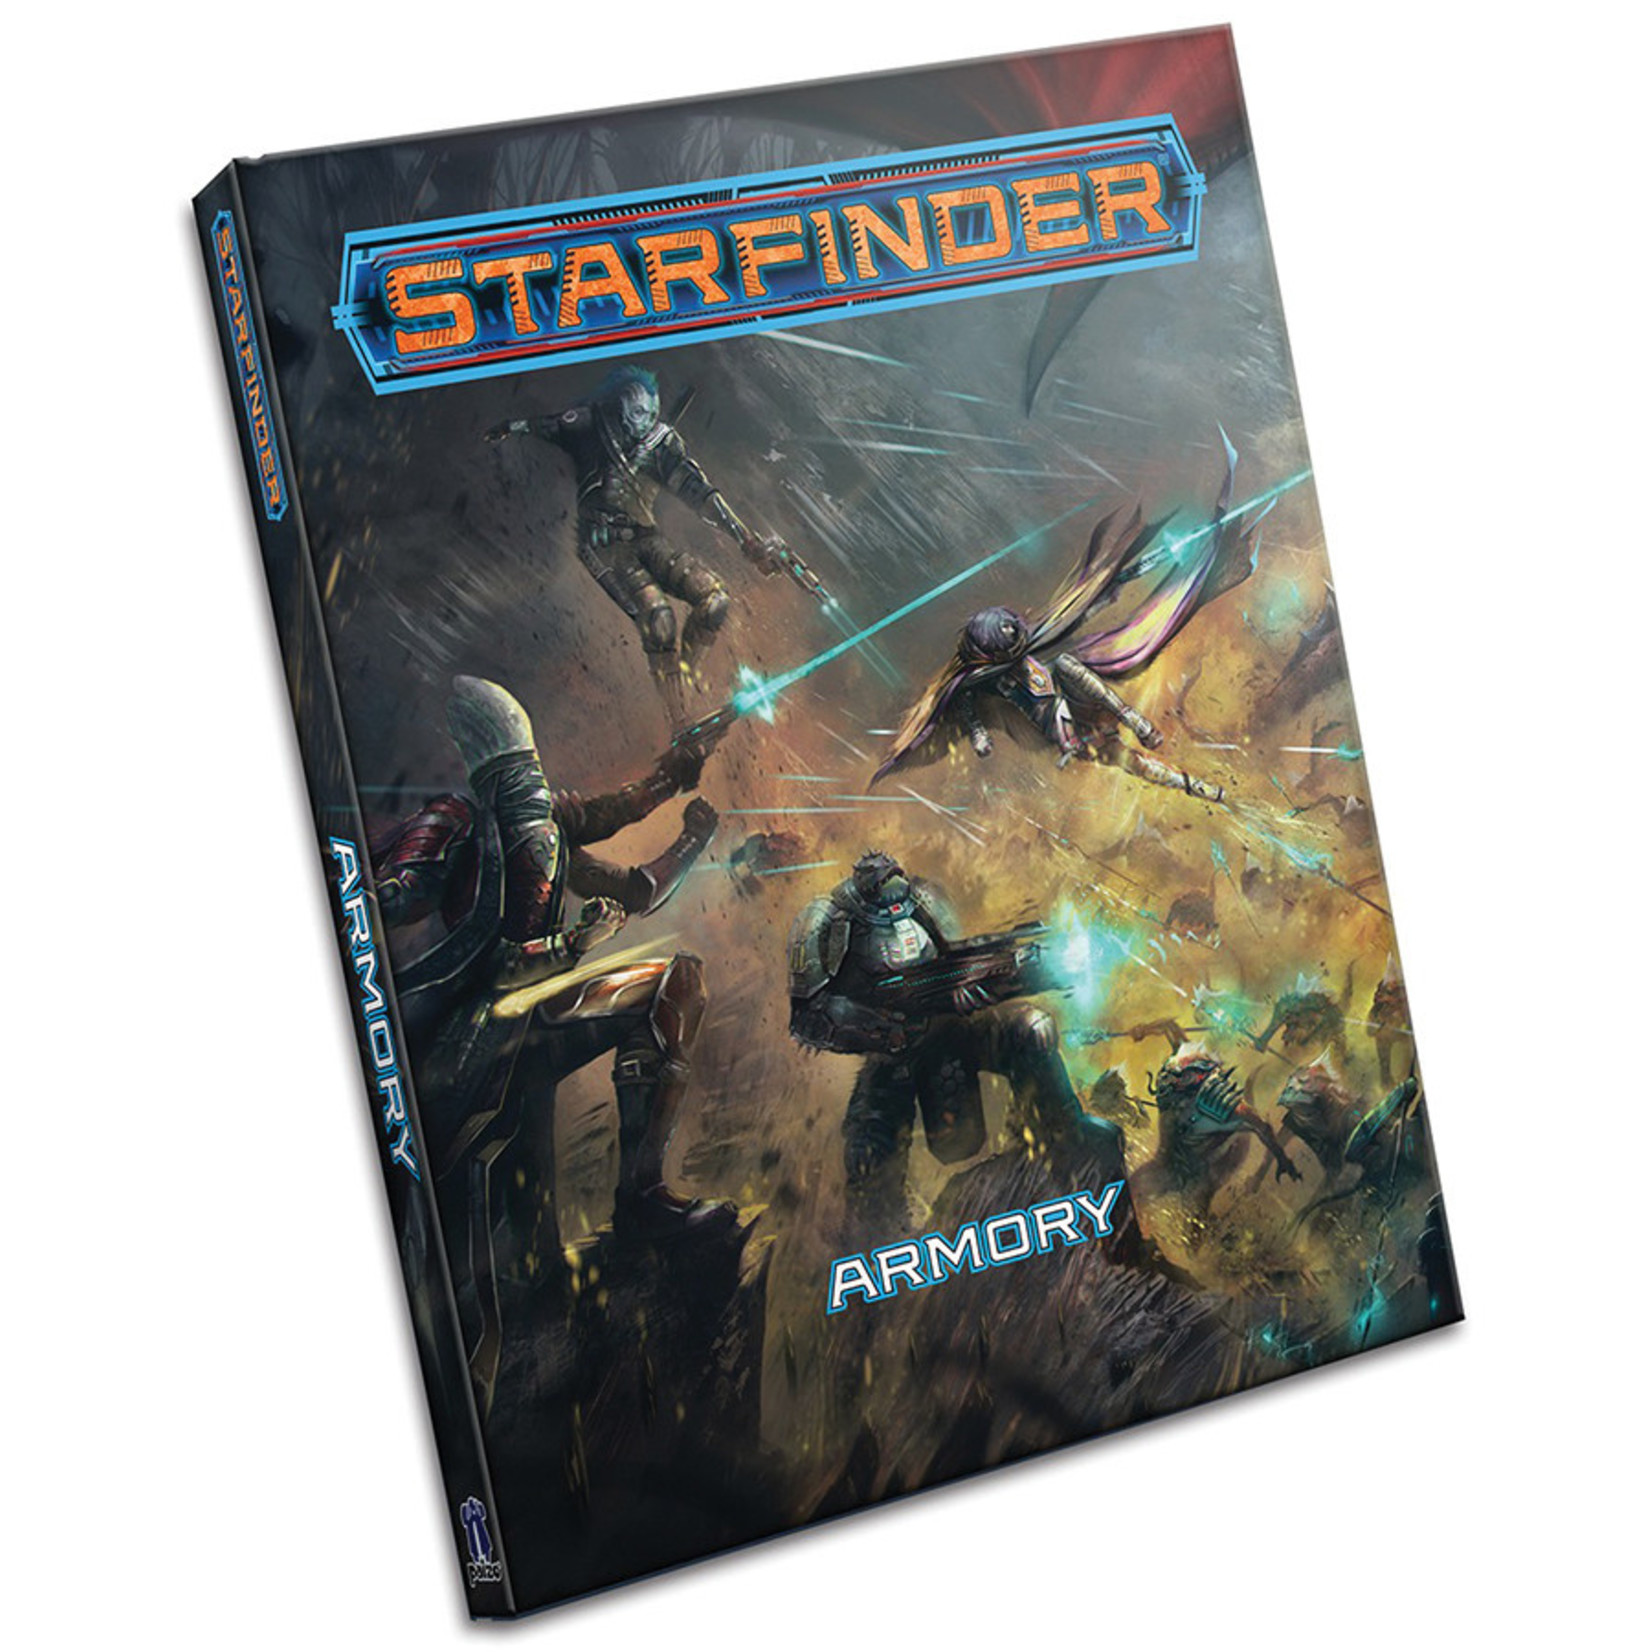 Starfinder RPG: Armory Hardcover